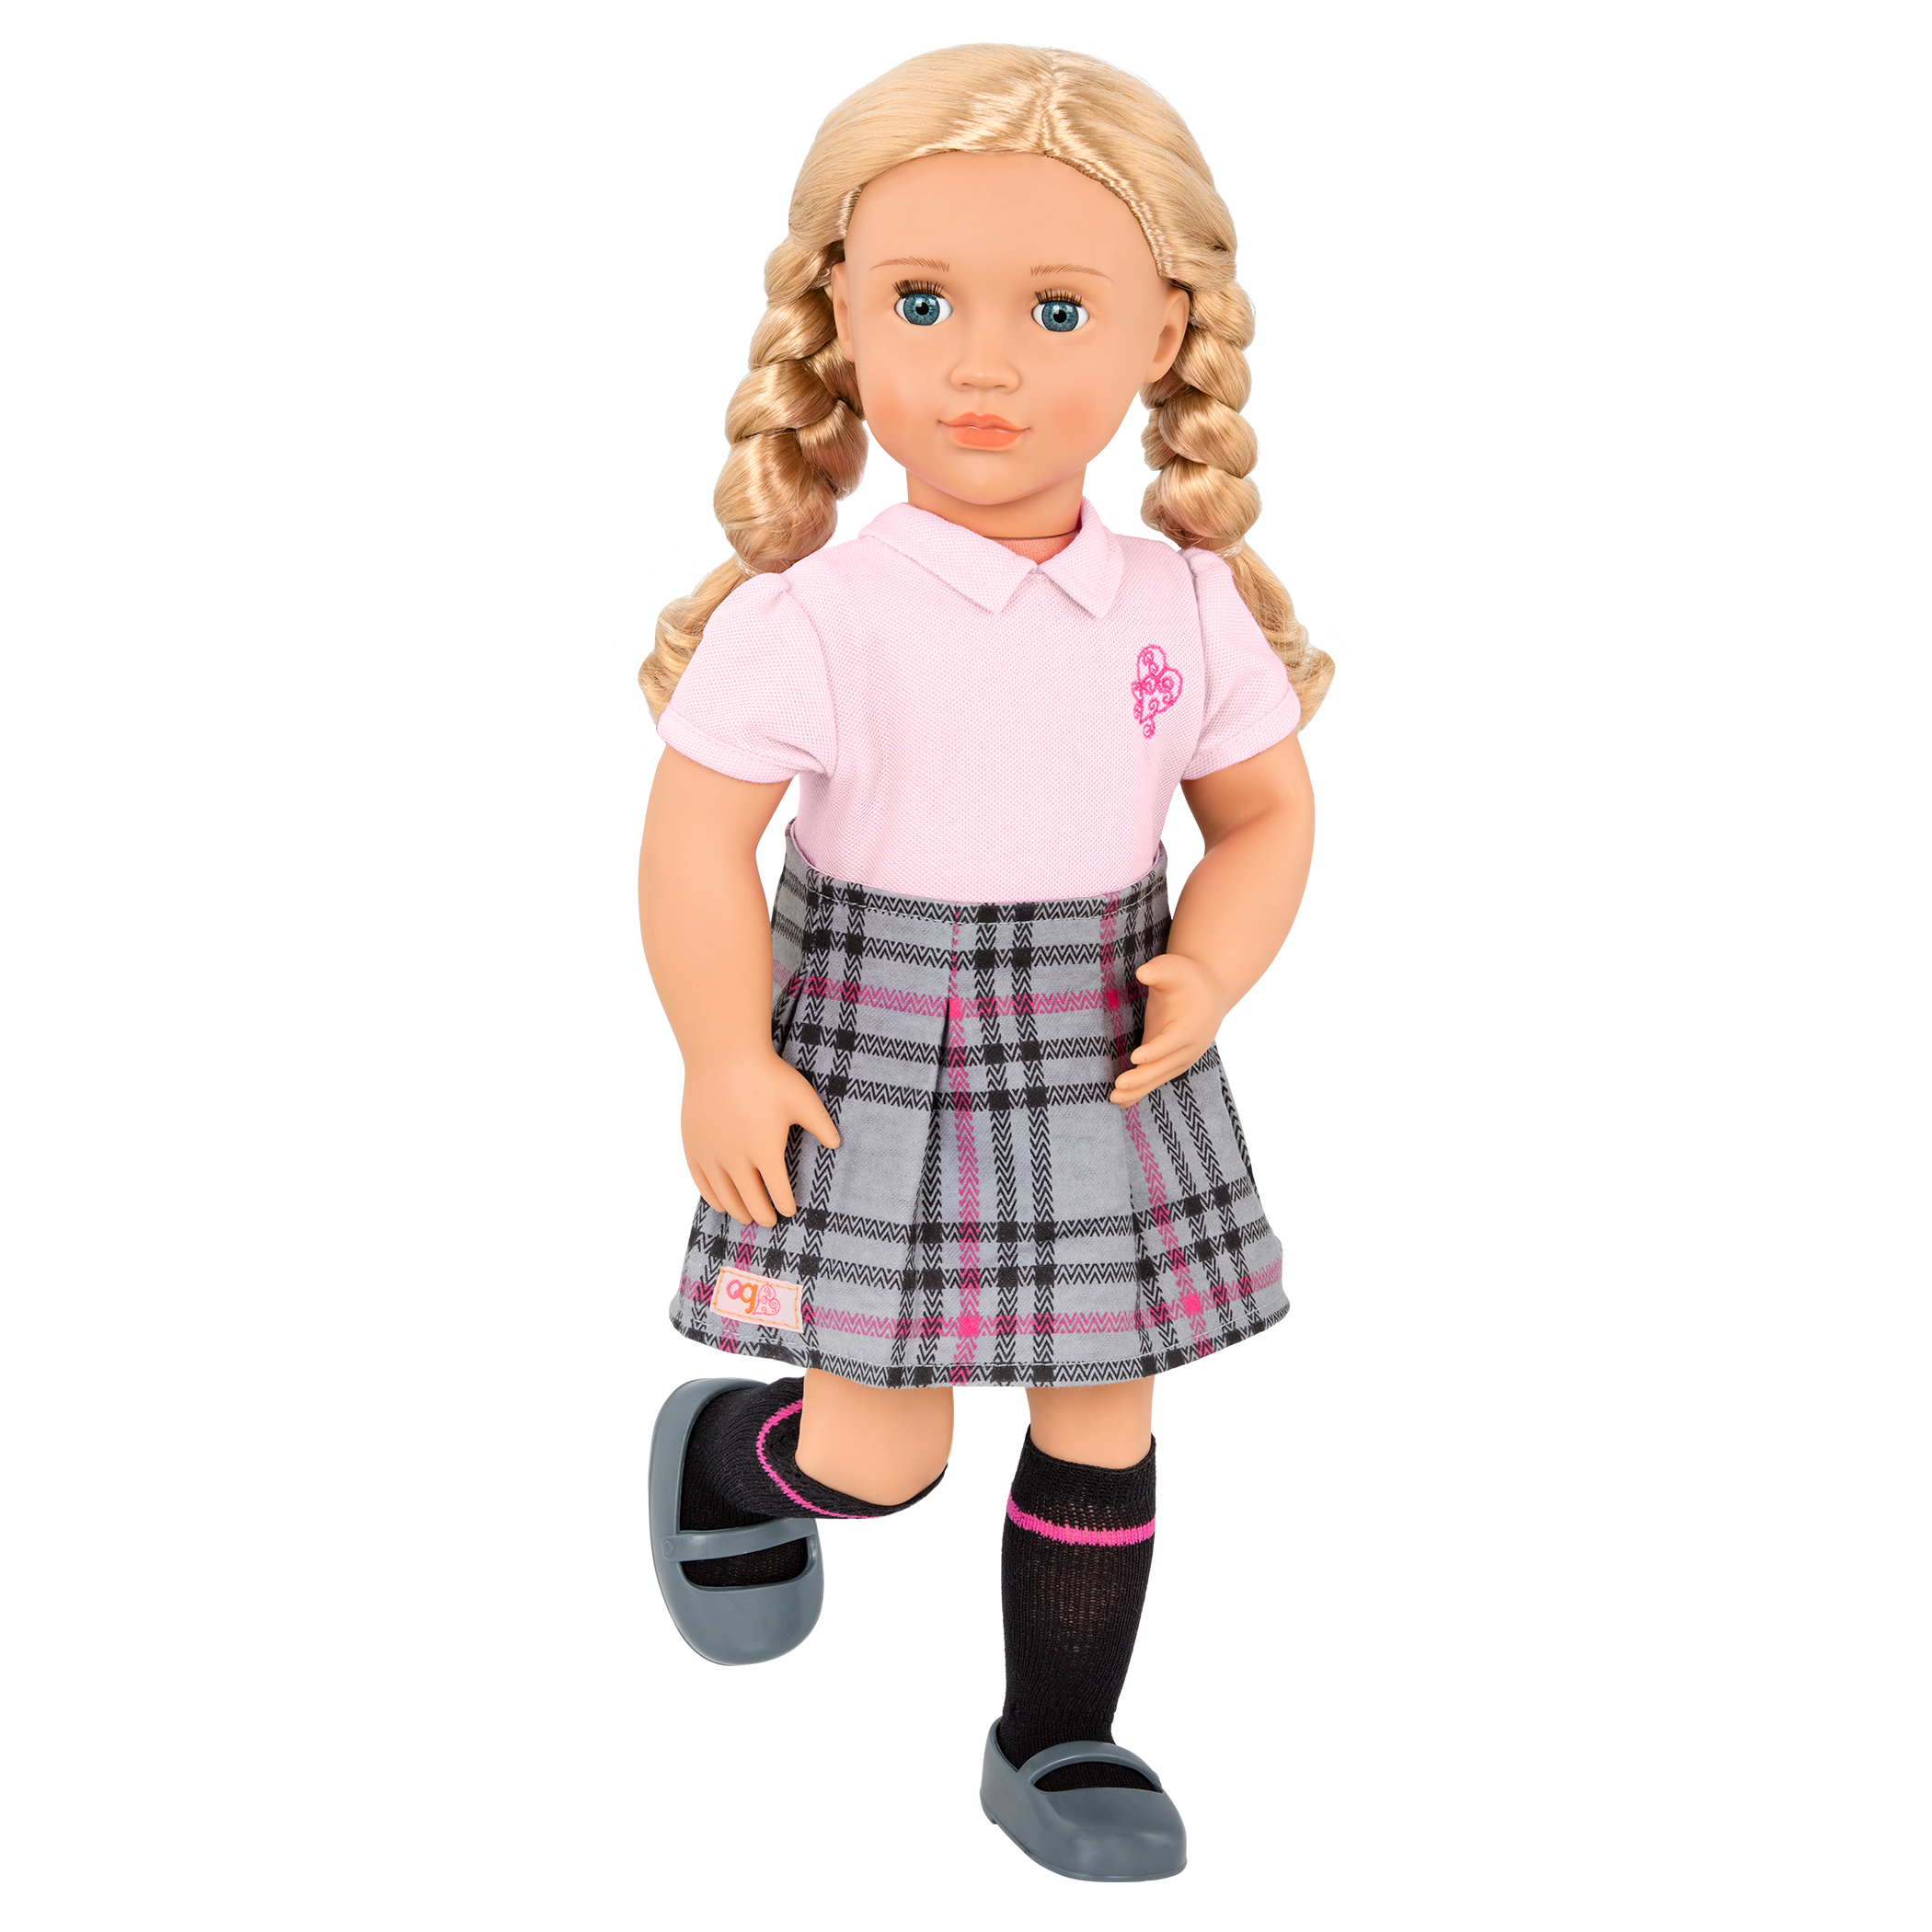 18-inch doll with blonde hair, blue eyes, school accessories and storybook